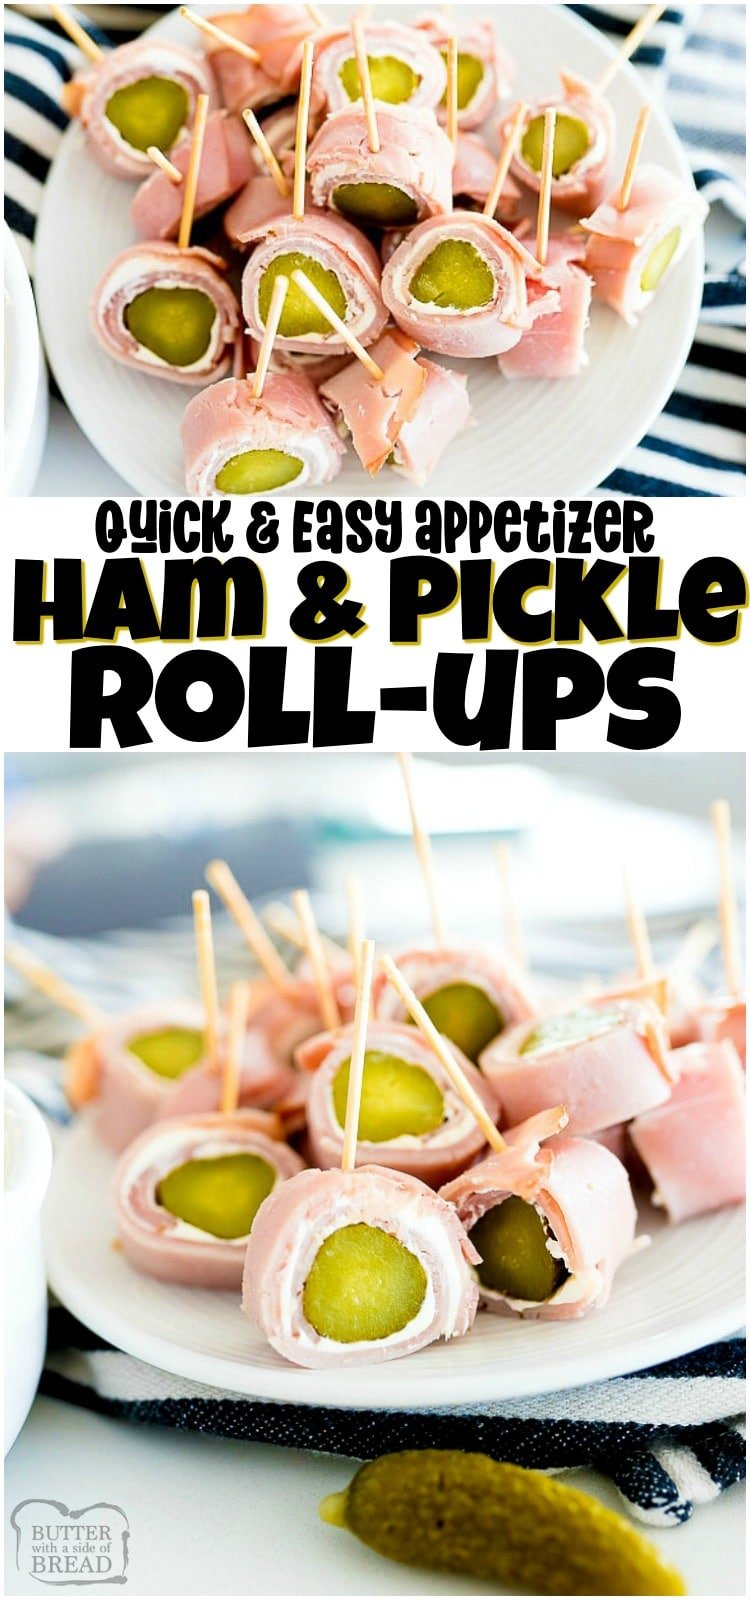 Ham and Pickle Roll Ups are a delicious and filling appetizer or could be used in lieu of lunch! The ham is topped with a garlic herb cream cheese spread then rolled up with a pickle inside. This simple appetizer is always a hit! #ham #pickle #appetizer #creamcheese #recipe from BUTTER WITH A SIDE OF BREAD